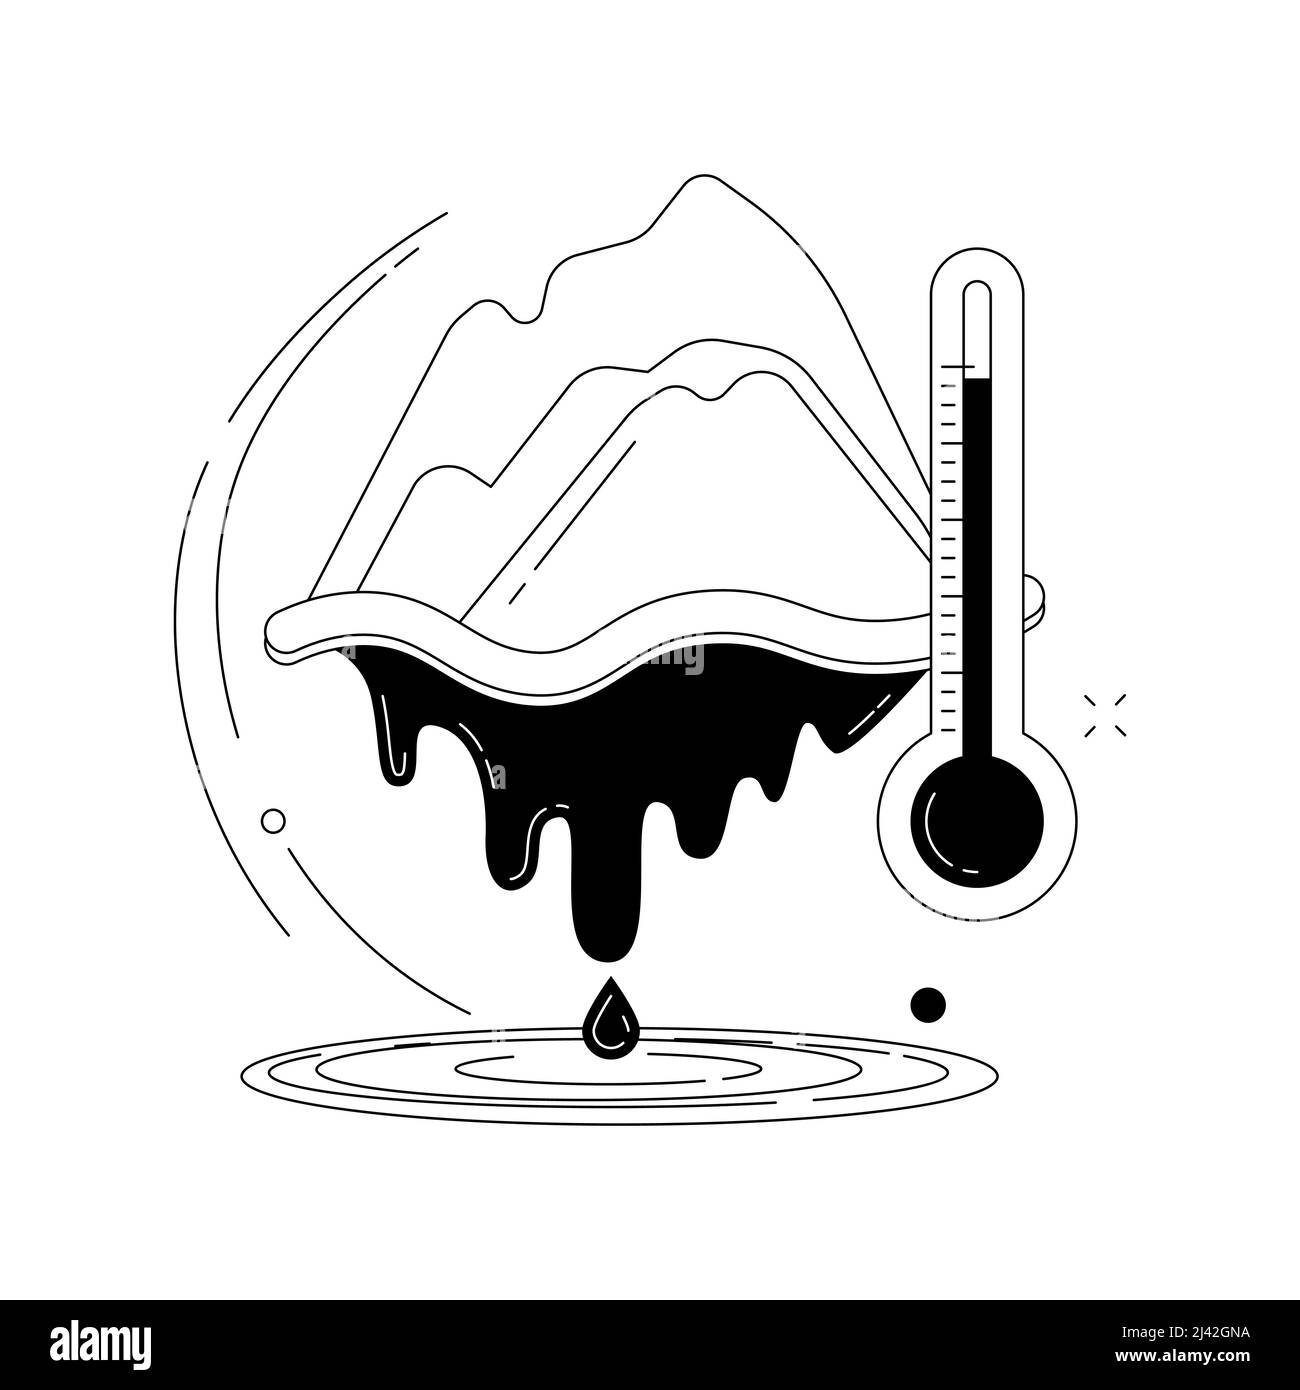 Climate change abstract concept vector illustration. Environmental activist demonstration, global warming report, weather, climatic condition change c Stock Vector